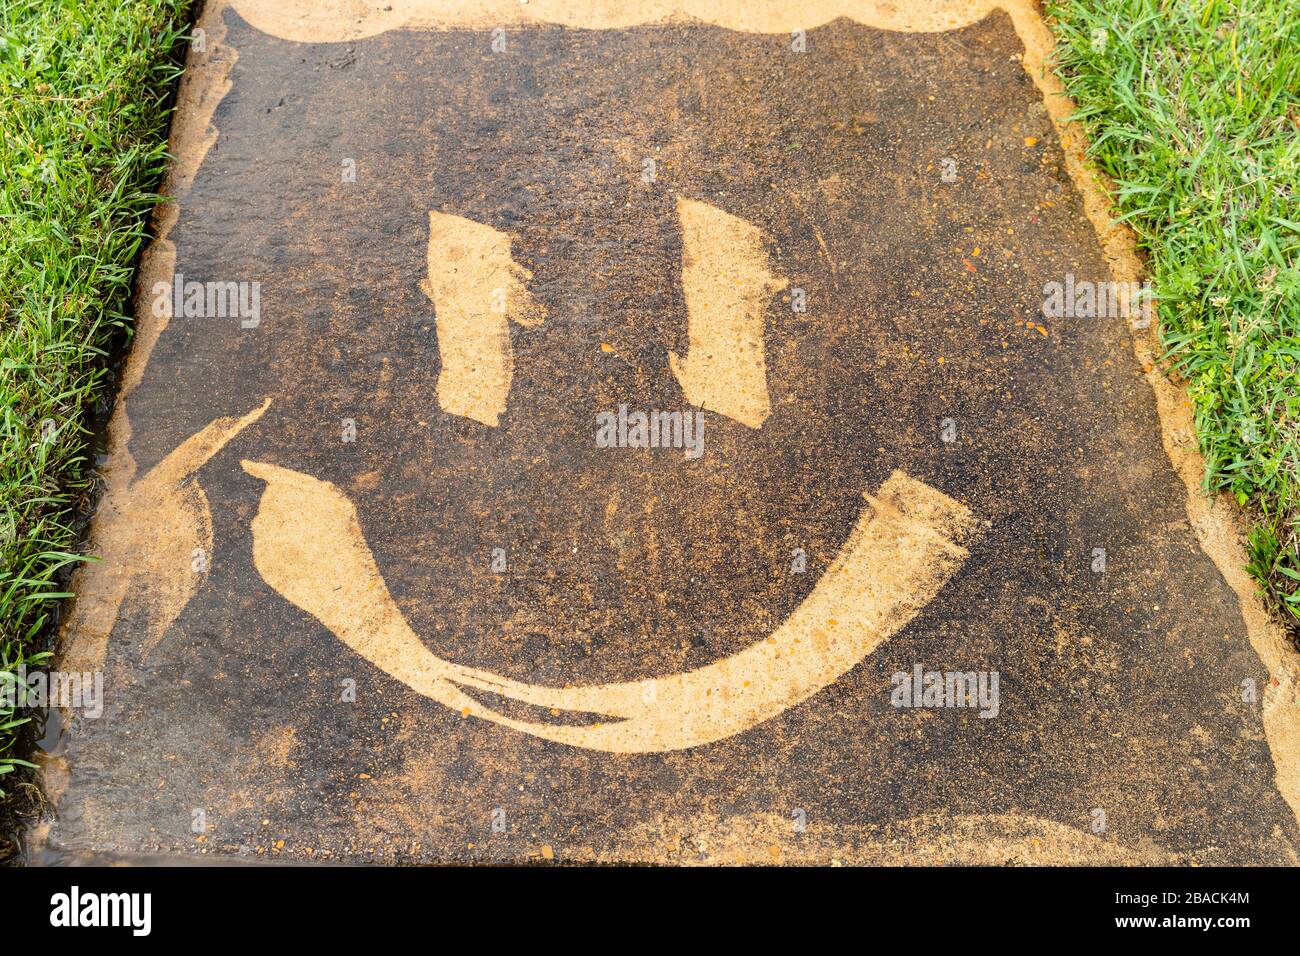 A smiley face created on a dirty sidewalk with a pressure washer Stock Photo